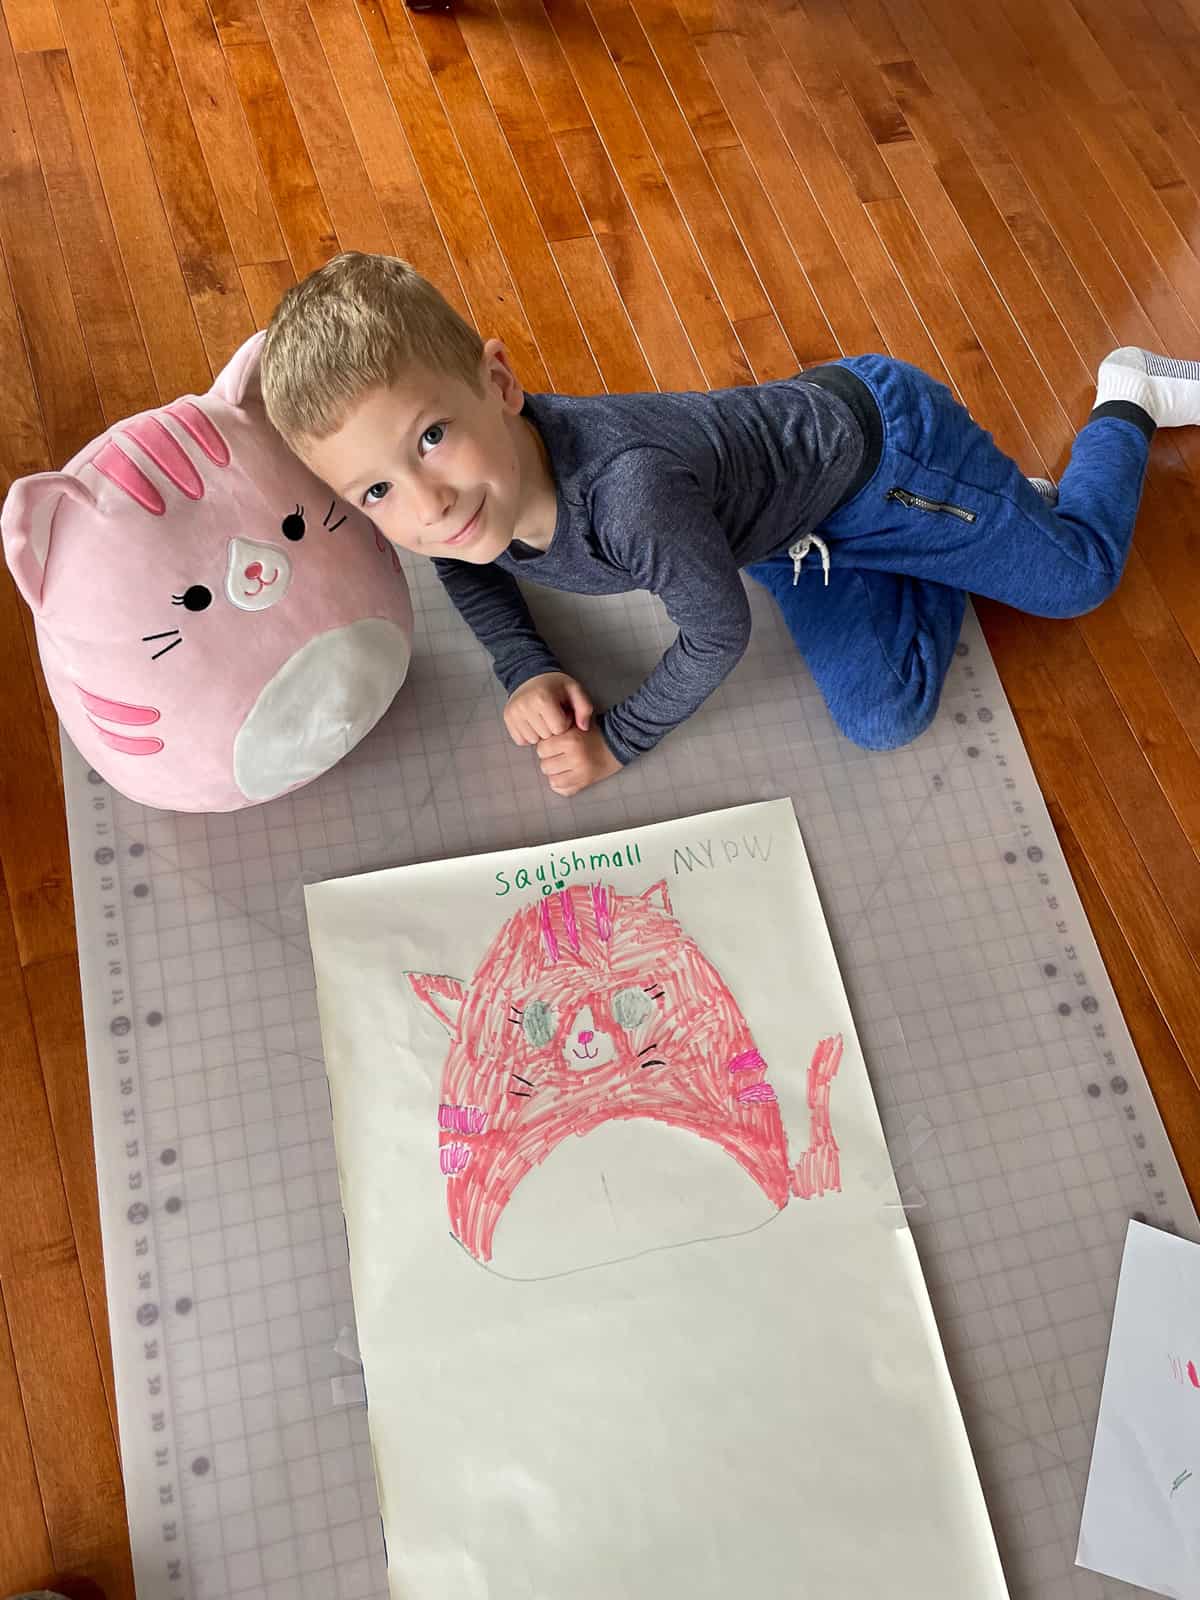 a kid with a stuffed animal and a picture he drew of it.